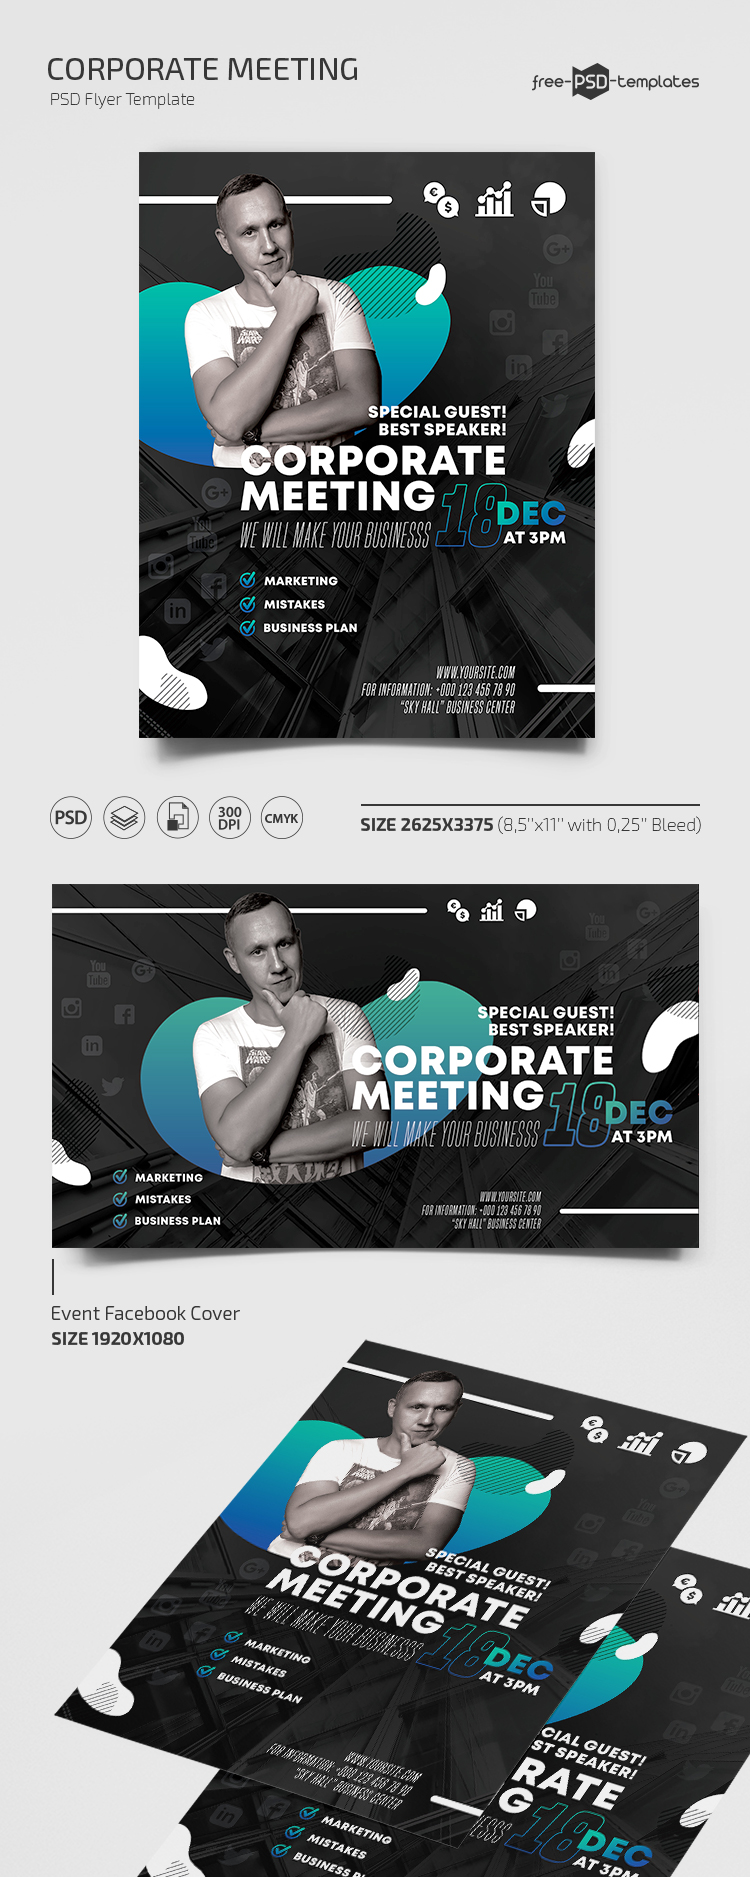 Meeting Flyer Template from free-psd-templates.com